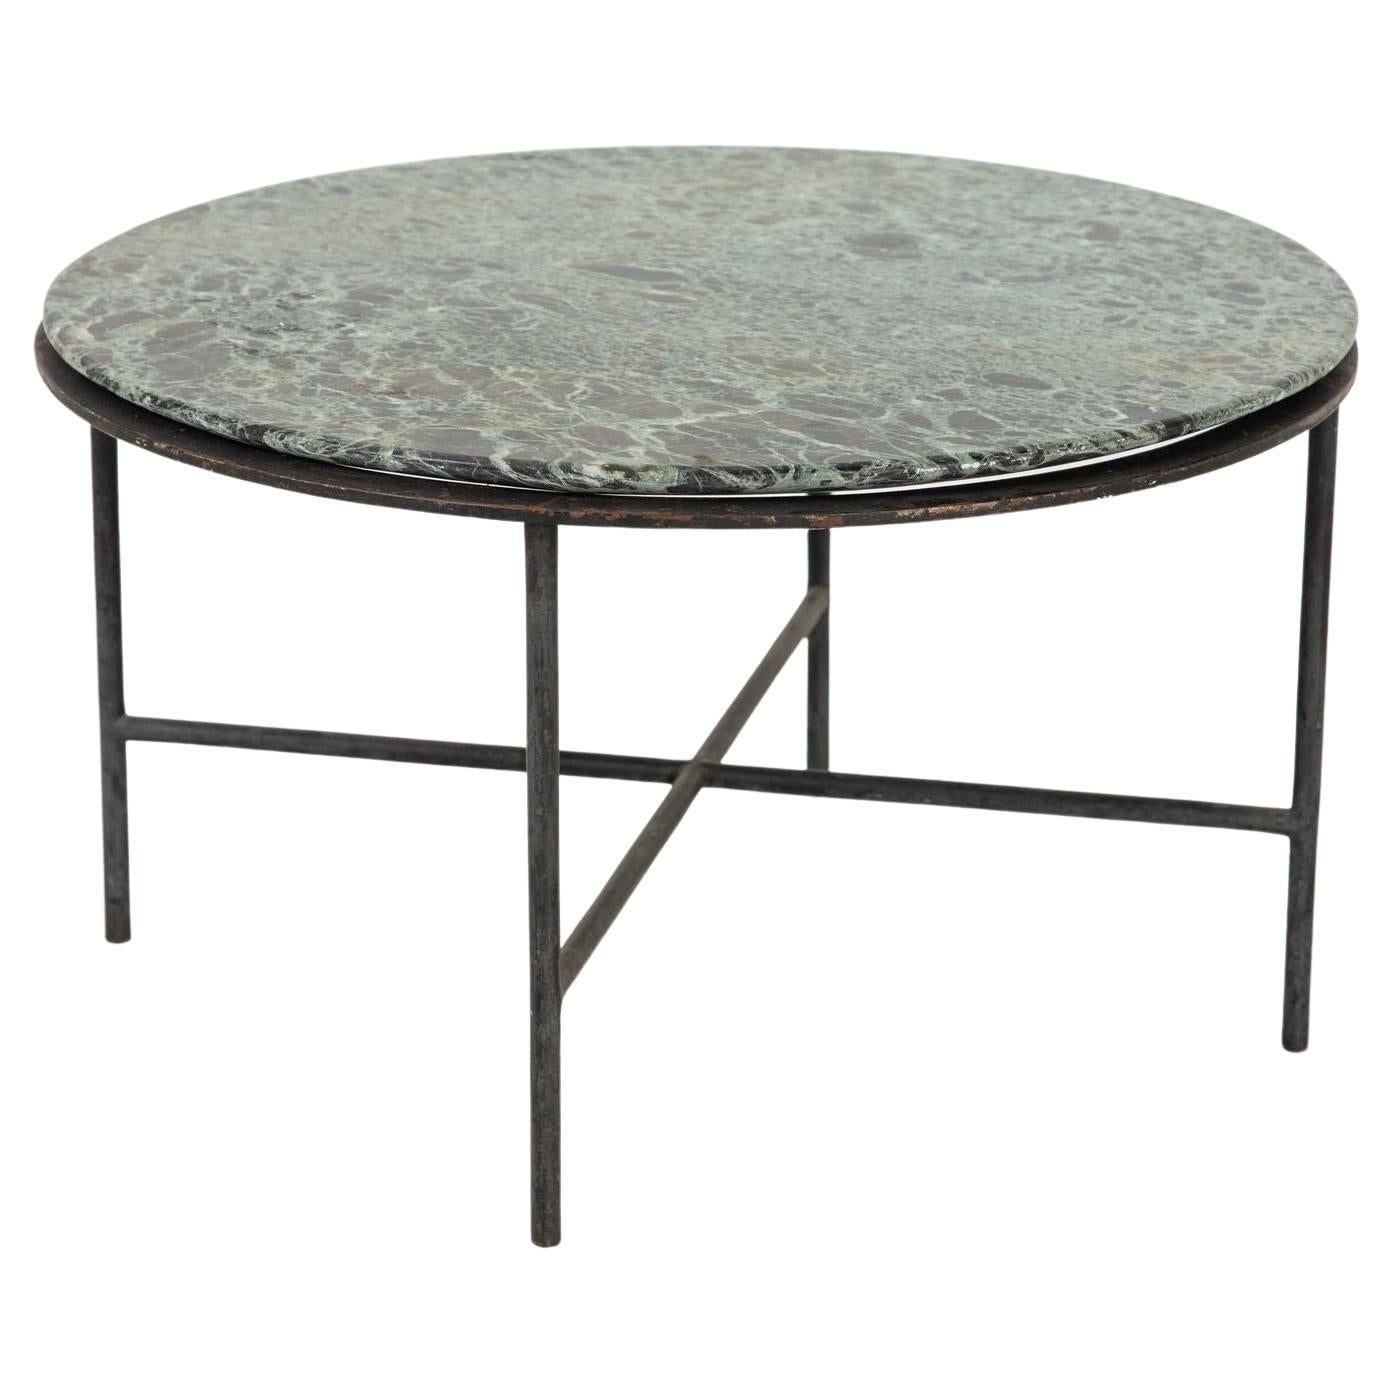 Round Iron base Cocktail Table with Green Marble Top, France 1960s For Sale